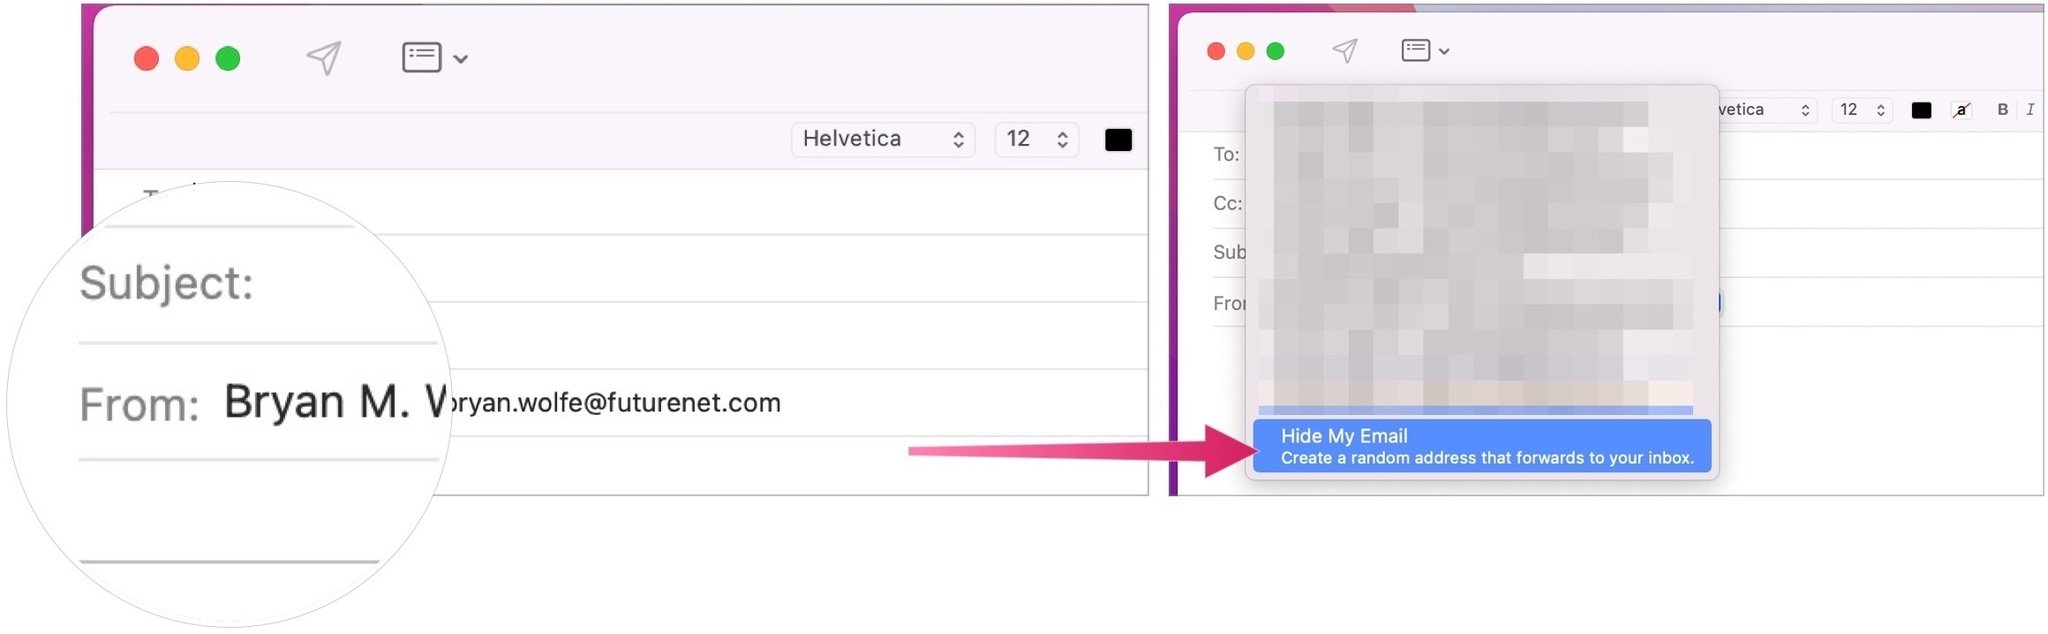 To create a new random email through the Mail app, click From to select an email address to use. Choose Hide My Email from the pull-down menu.